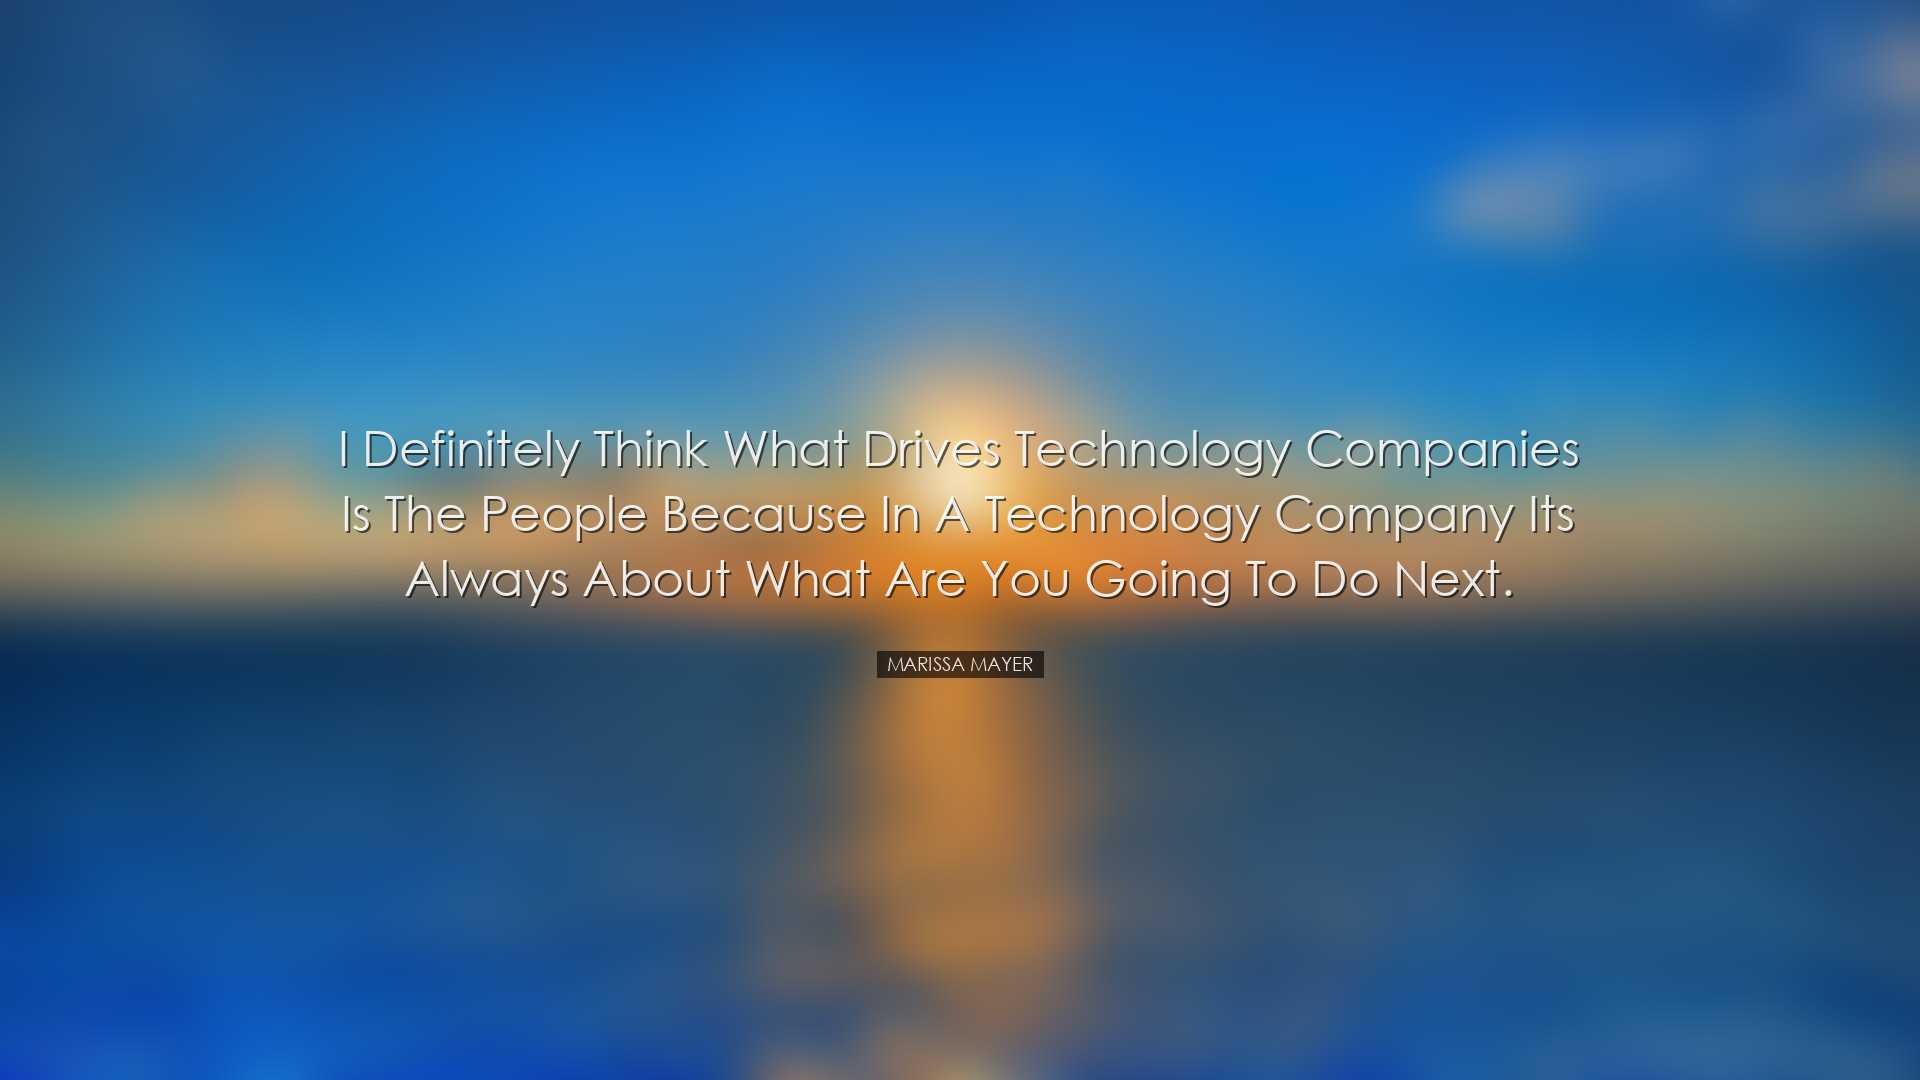 I definitely think what drives technology companies is the people